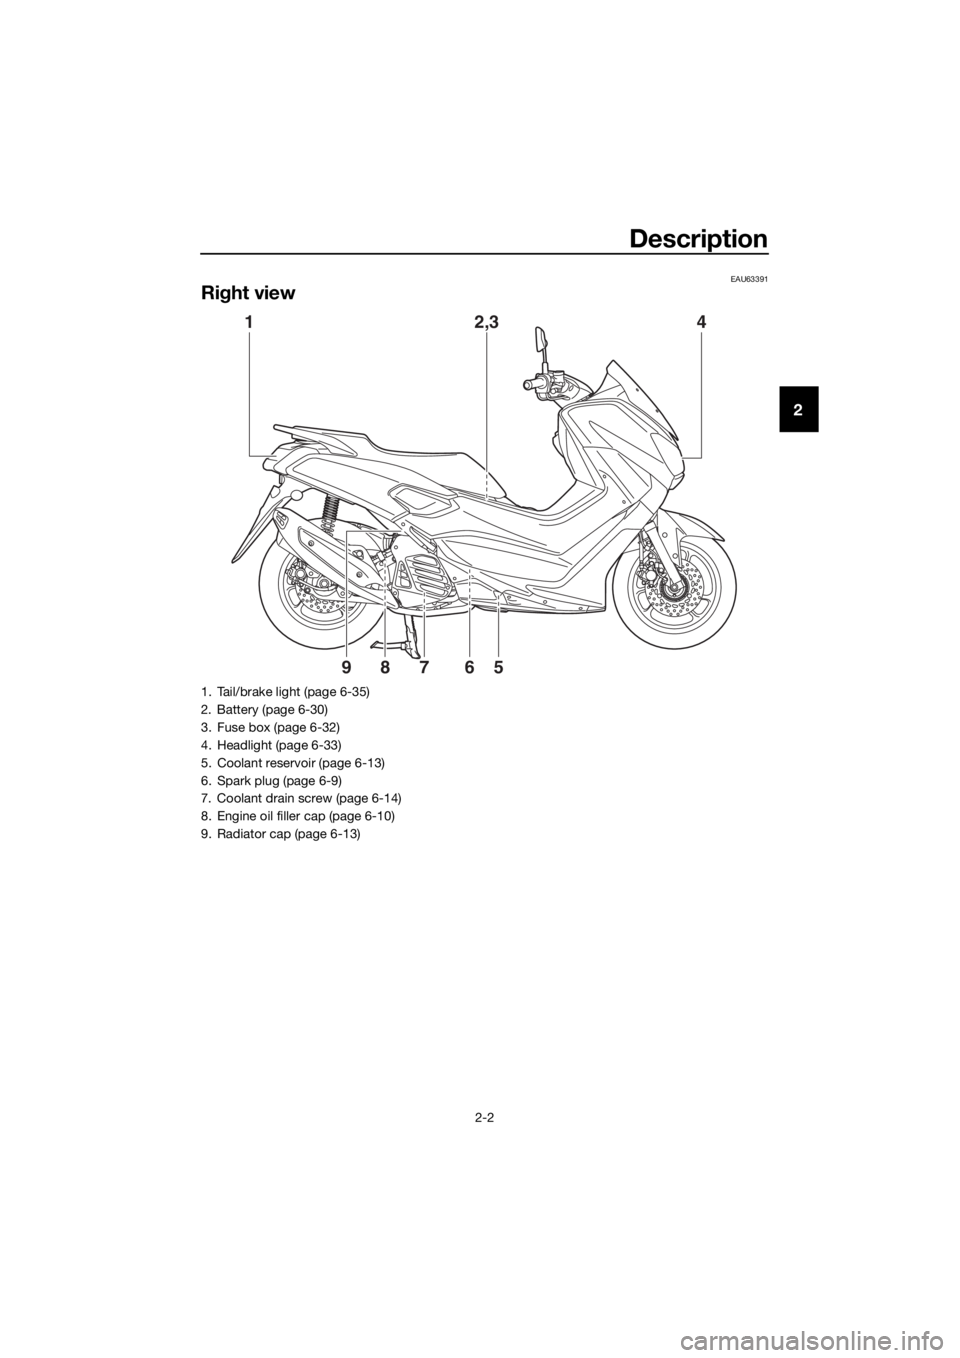 YAMAHA NMAX 150 2017  Owners Manual Description
2-2
2
EAU63391
Right view
1 2,34
567
89
1. Tail/brake light (page 6-35)
2. Battery (page 6-30)
3. Fuse box (page 6-32)
4. Headlight (page 6-33)
5. Coolant reservoir (page 6-13)
6. Spark pl